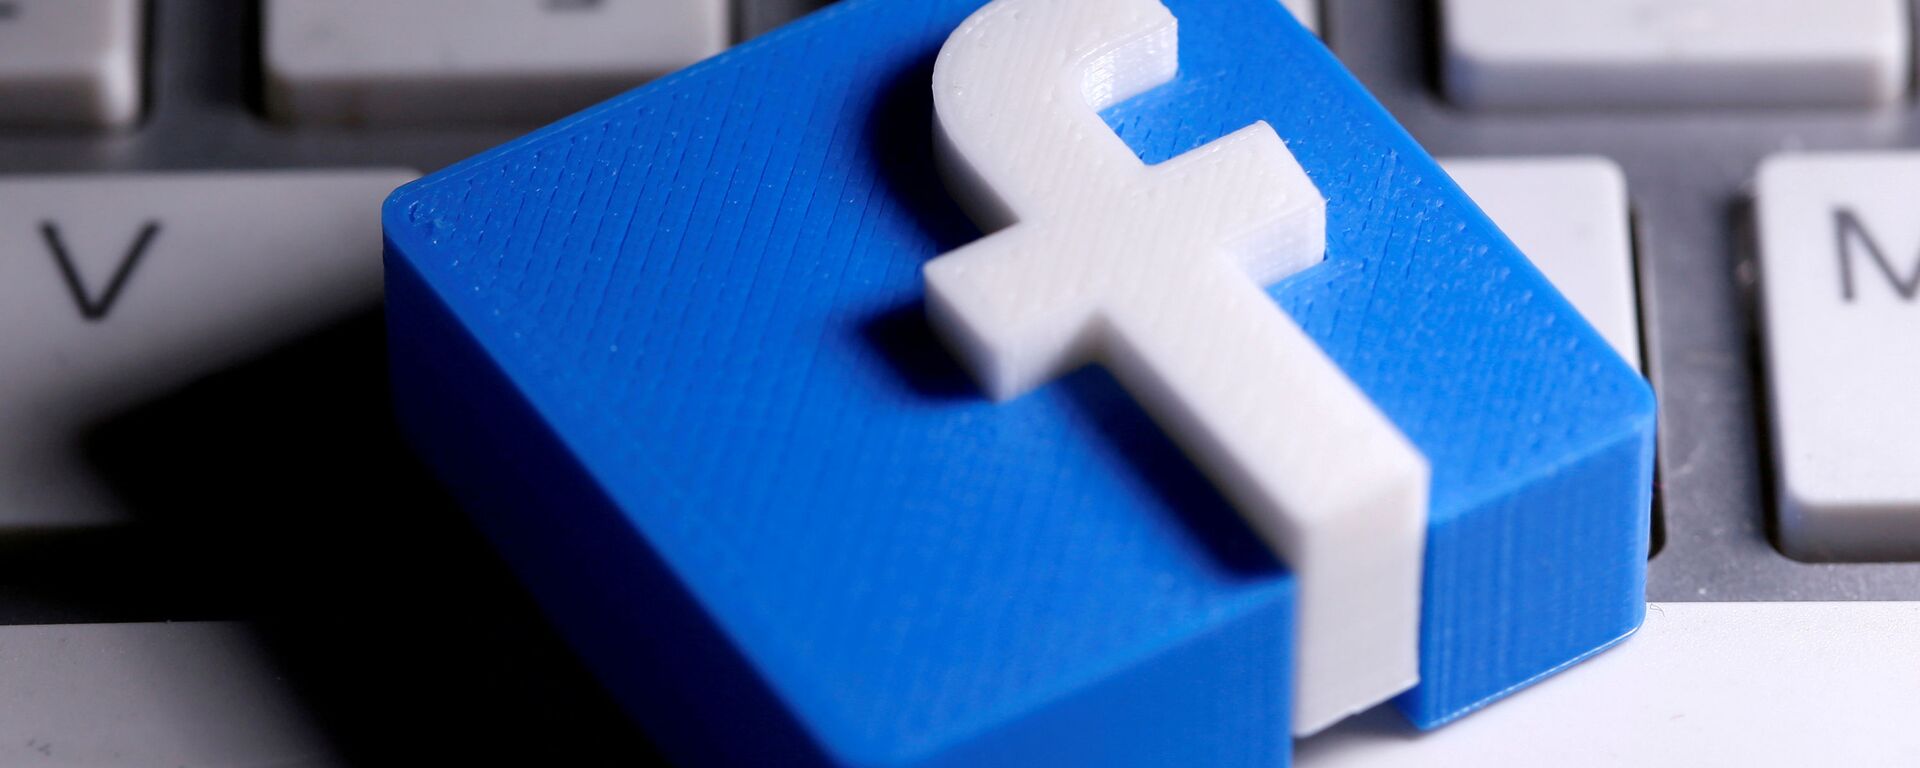 A 3D-printed Facebook logo is seen placed on a keyboard in this illustration, taken 25 March 2020.  - Sputnik International, 1920, 24.02.2021